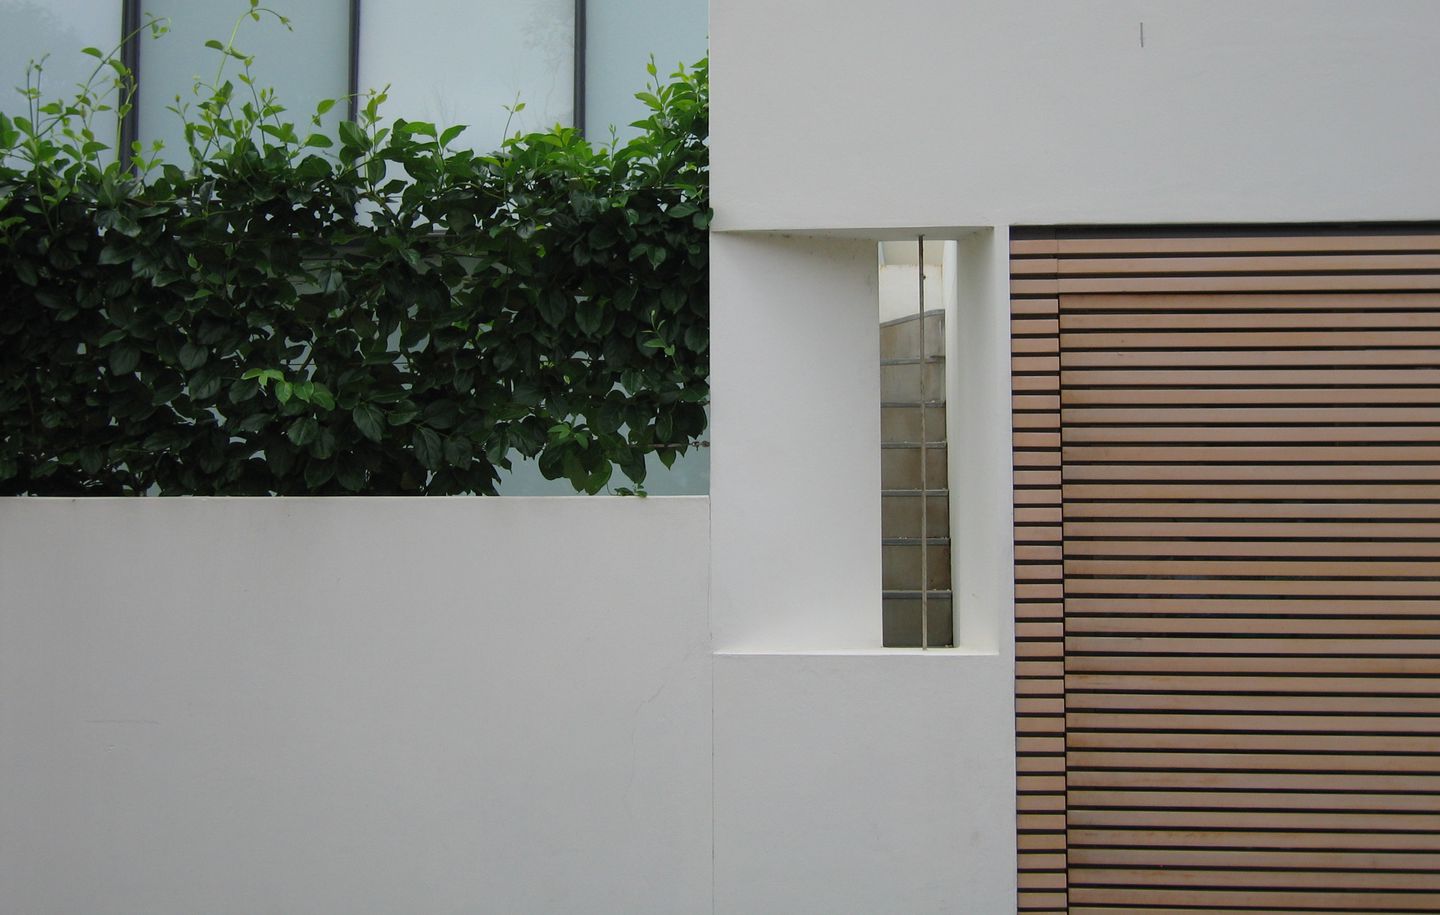  Detail view of white rendered garden wall and timber clad garage door of architect designed family home at Point Piper Sydney